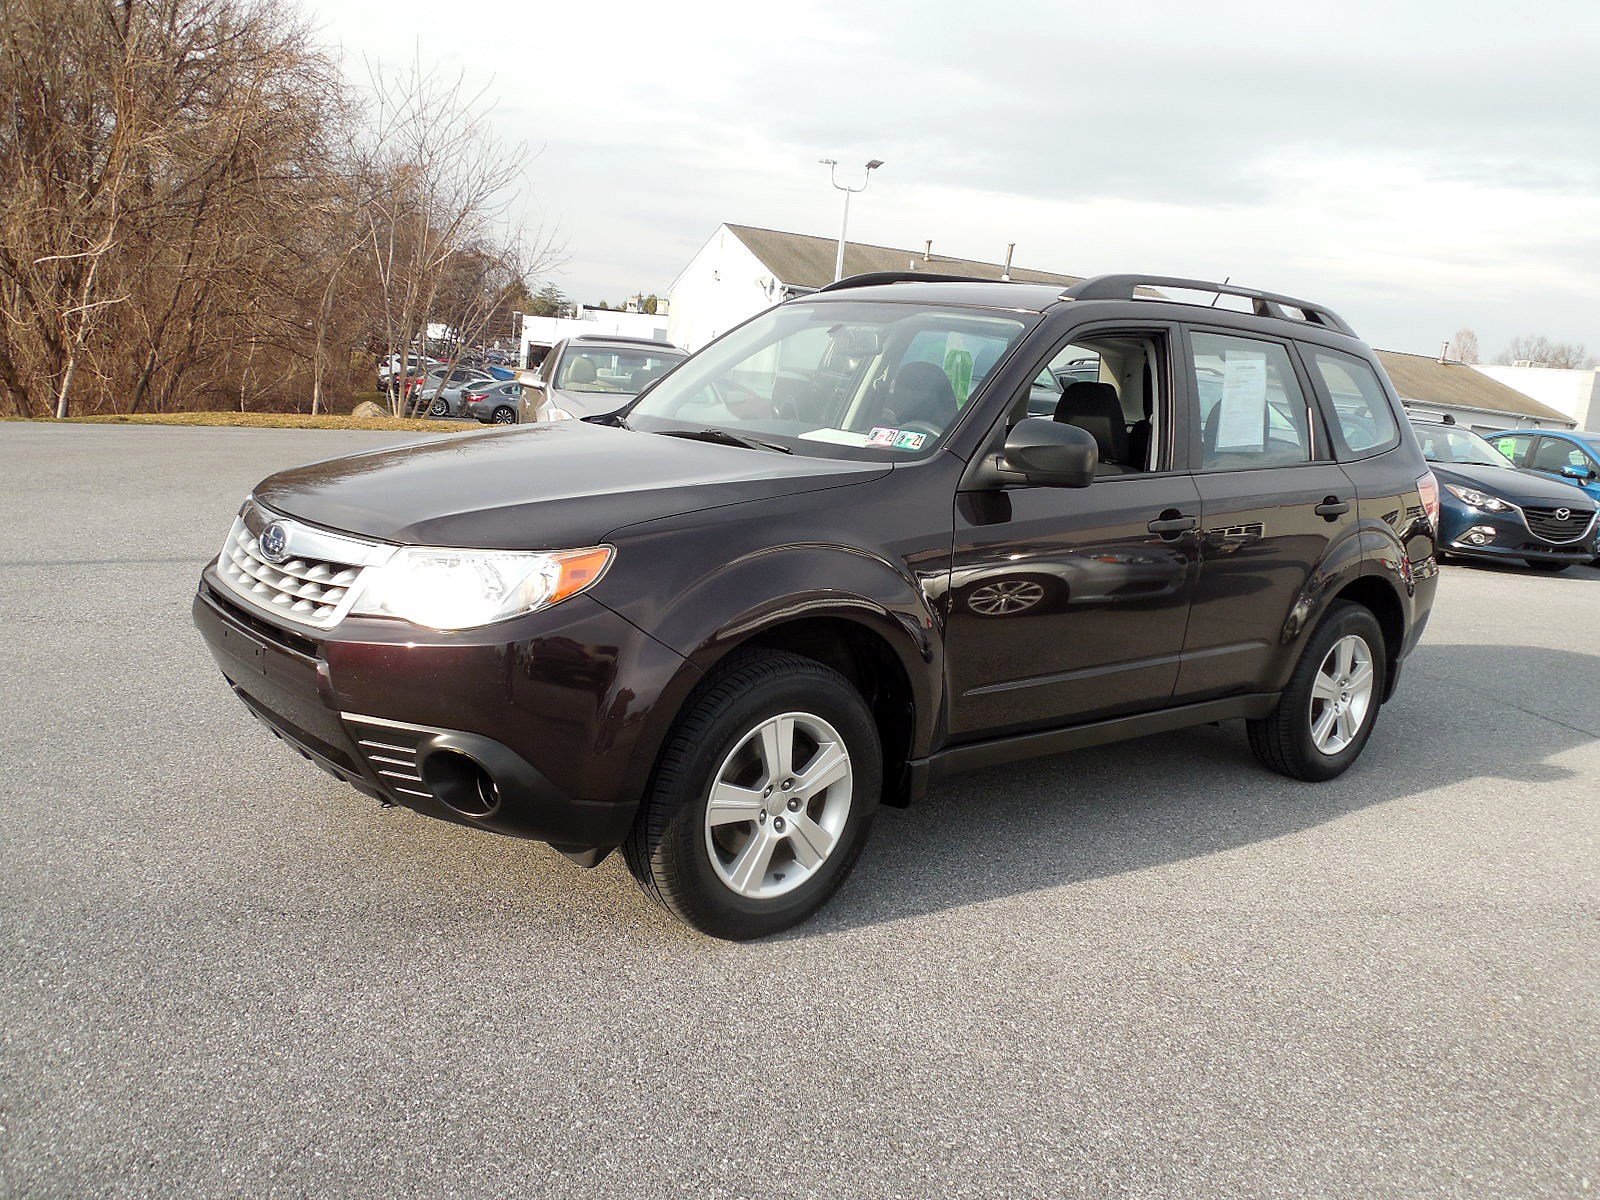 PreOwned 2013 Subaru Forester 2.5X Sport Utility in East